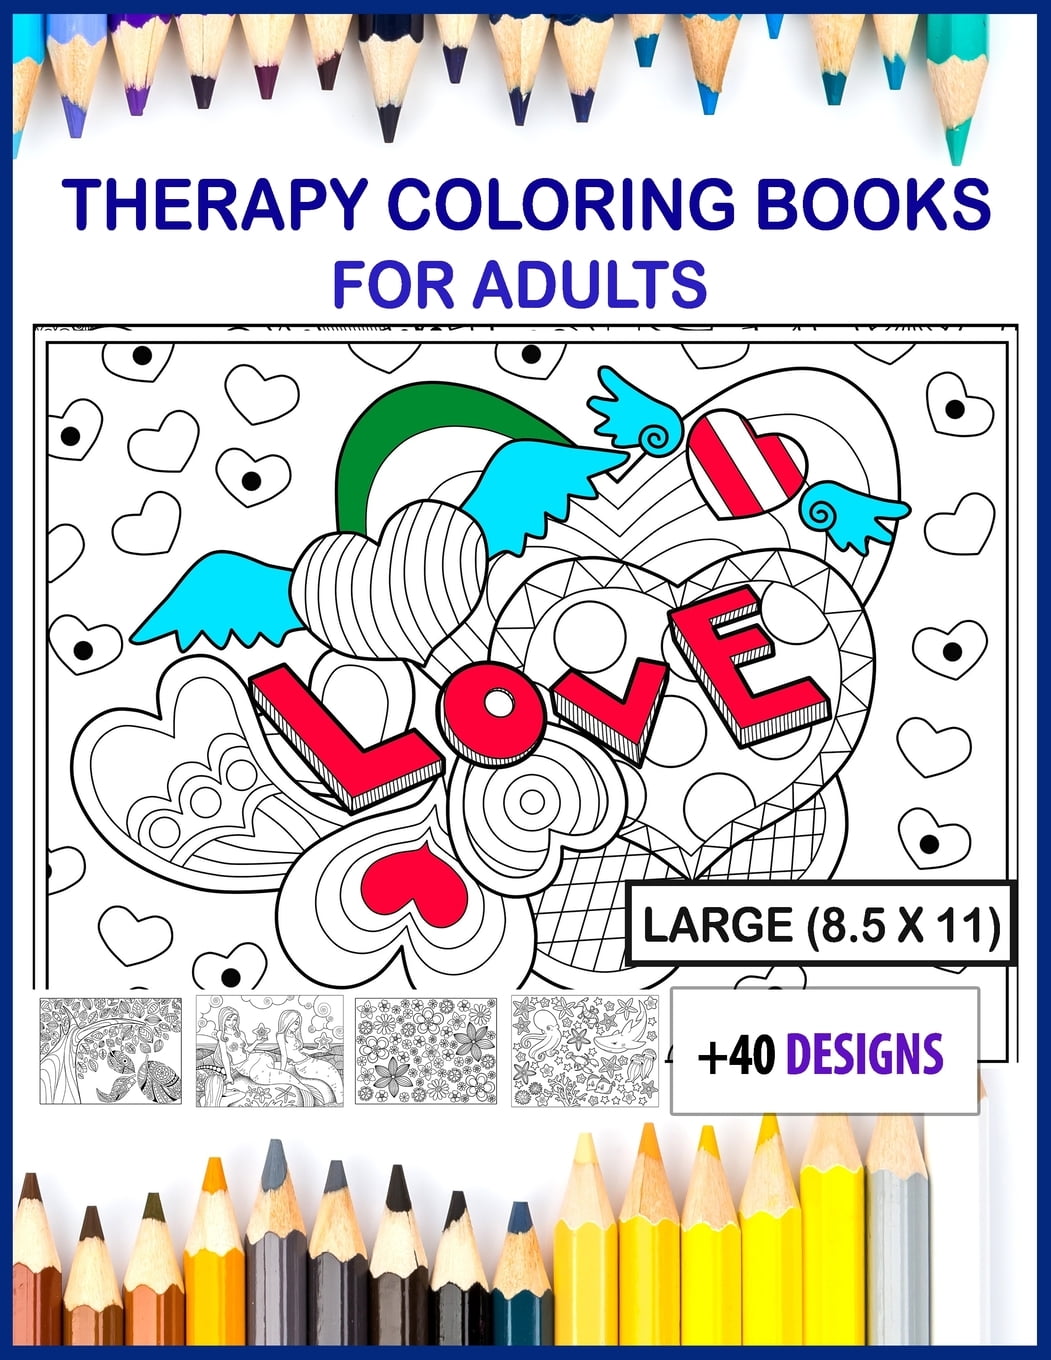 Download therapy coloring books for adults large print : therapy ...